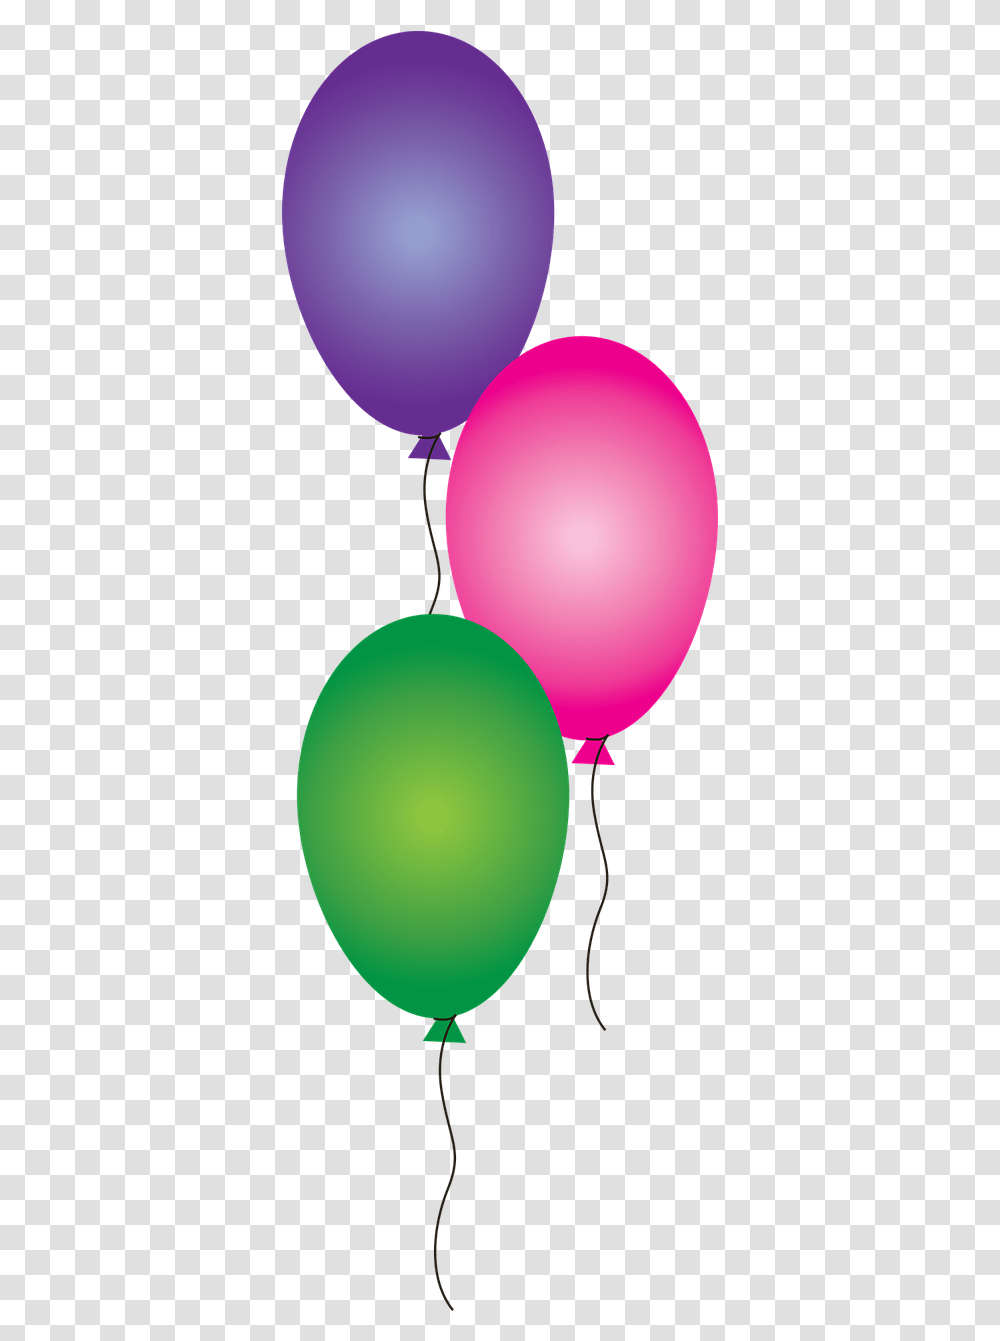 Balloons Celebrate Birthday Free Vector Graphic On Pixabay Birthday Balloons, Food, Egg Transparent Png